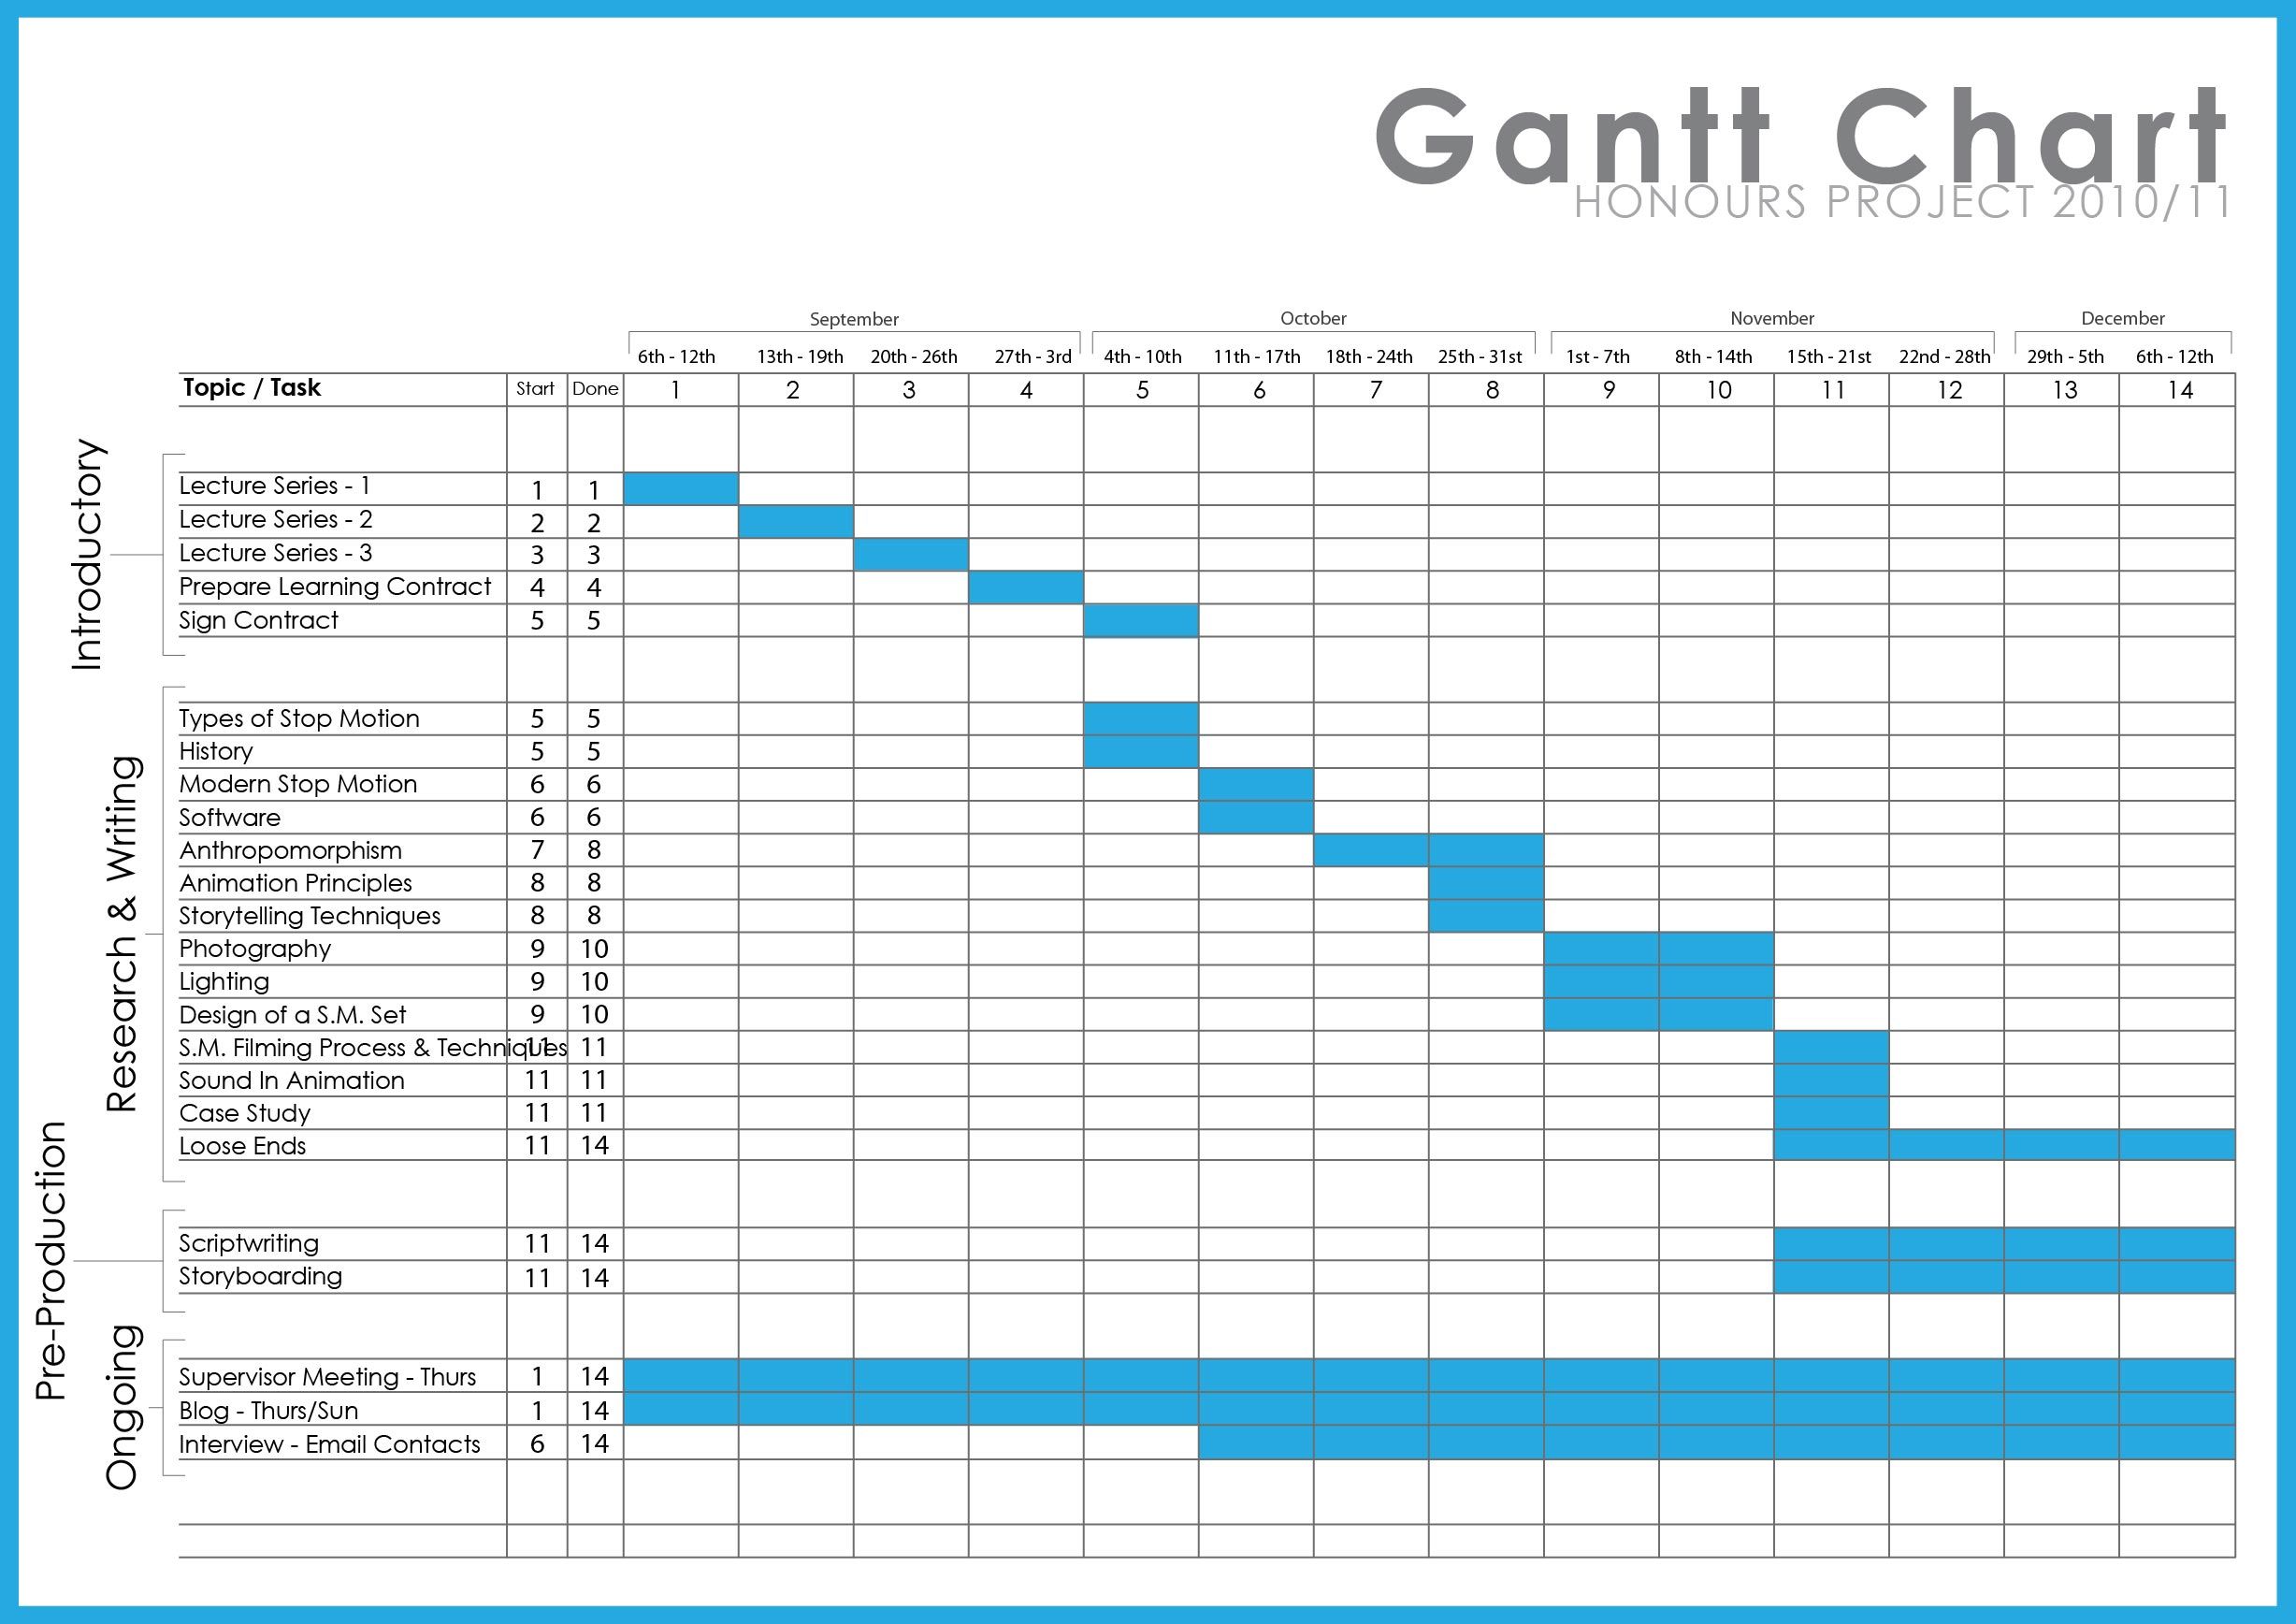 Need A Gantt Chart Template For Excel Or Powerpoint? Here Are 10 